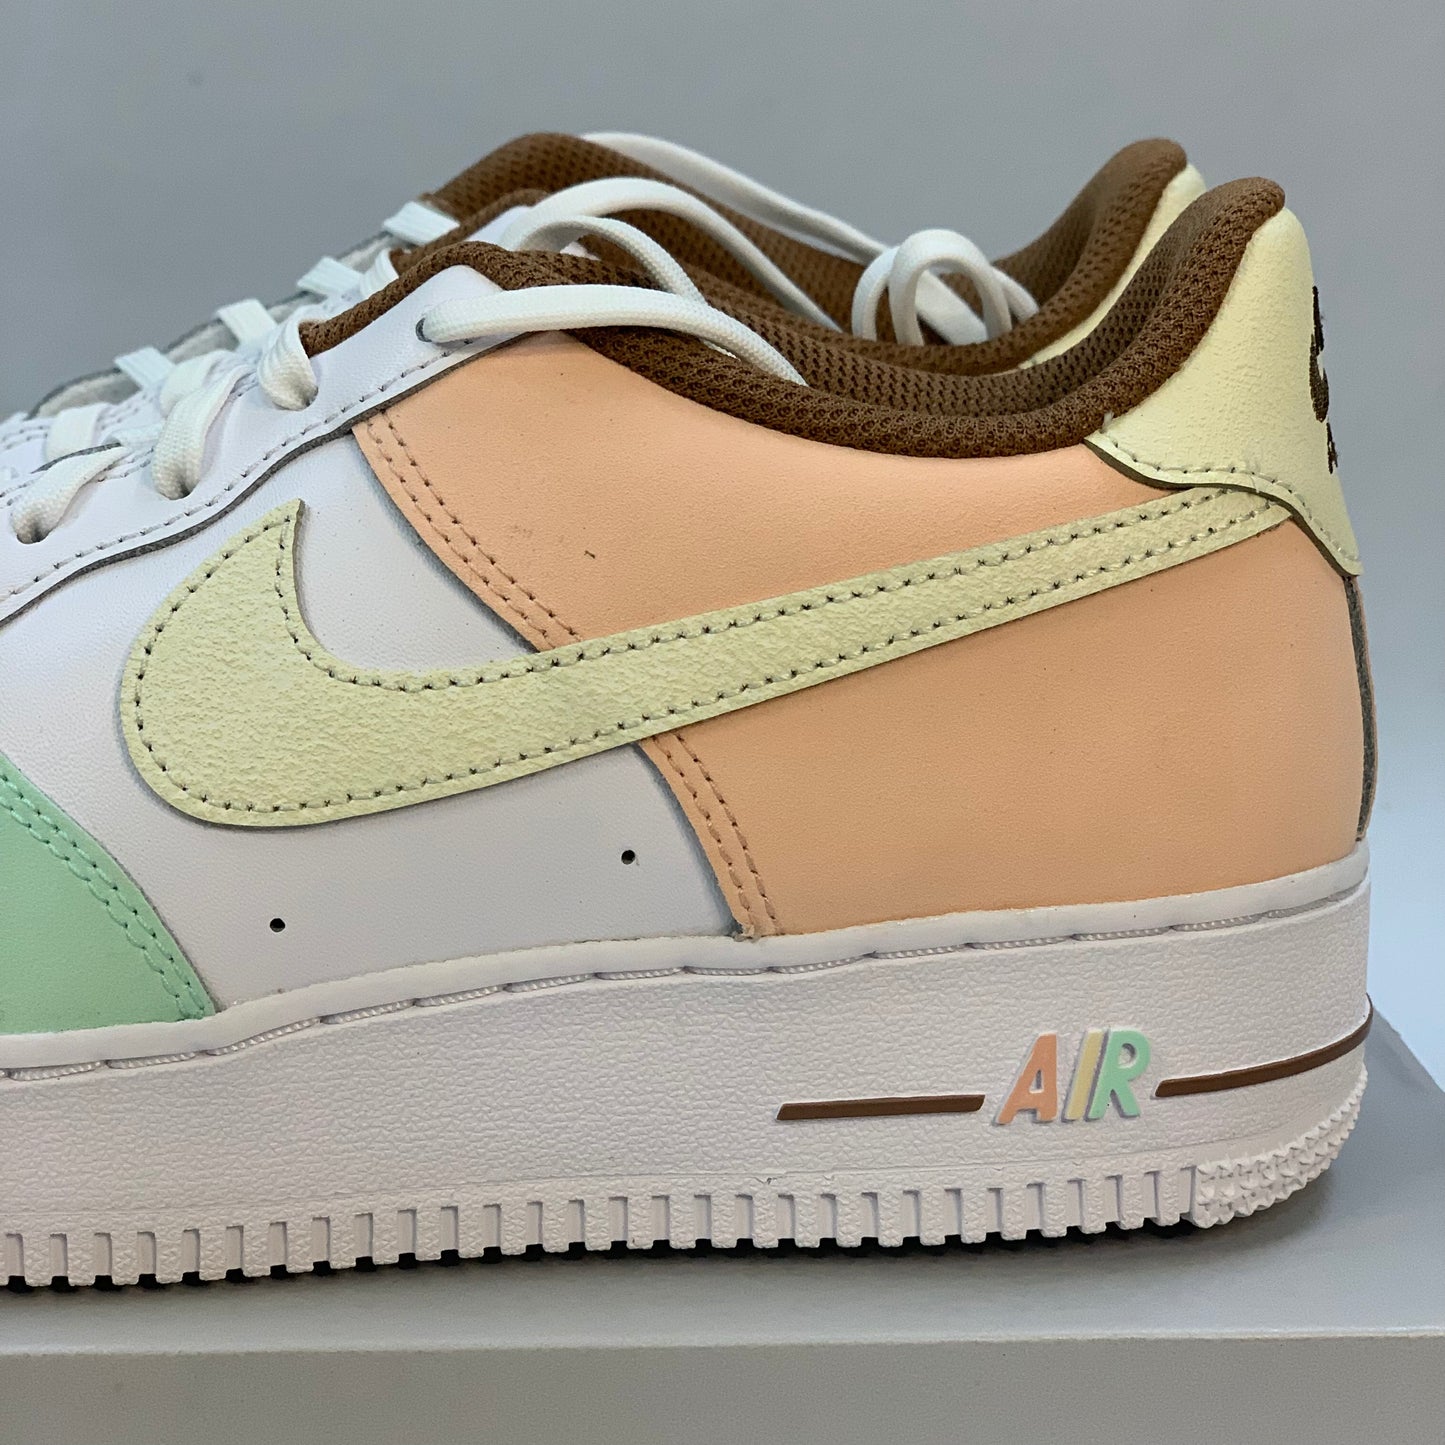 Nike Air Force 1 Low LVL 8 Ice Cream (GS)